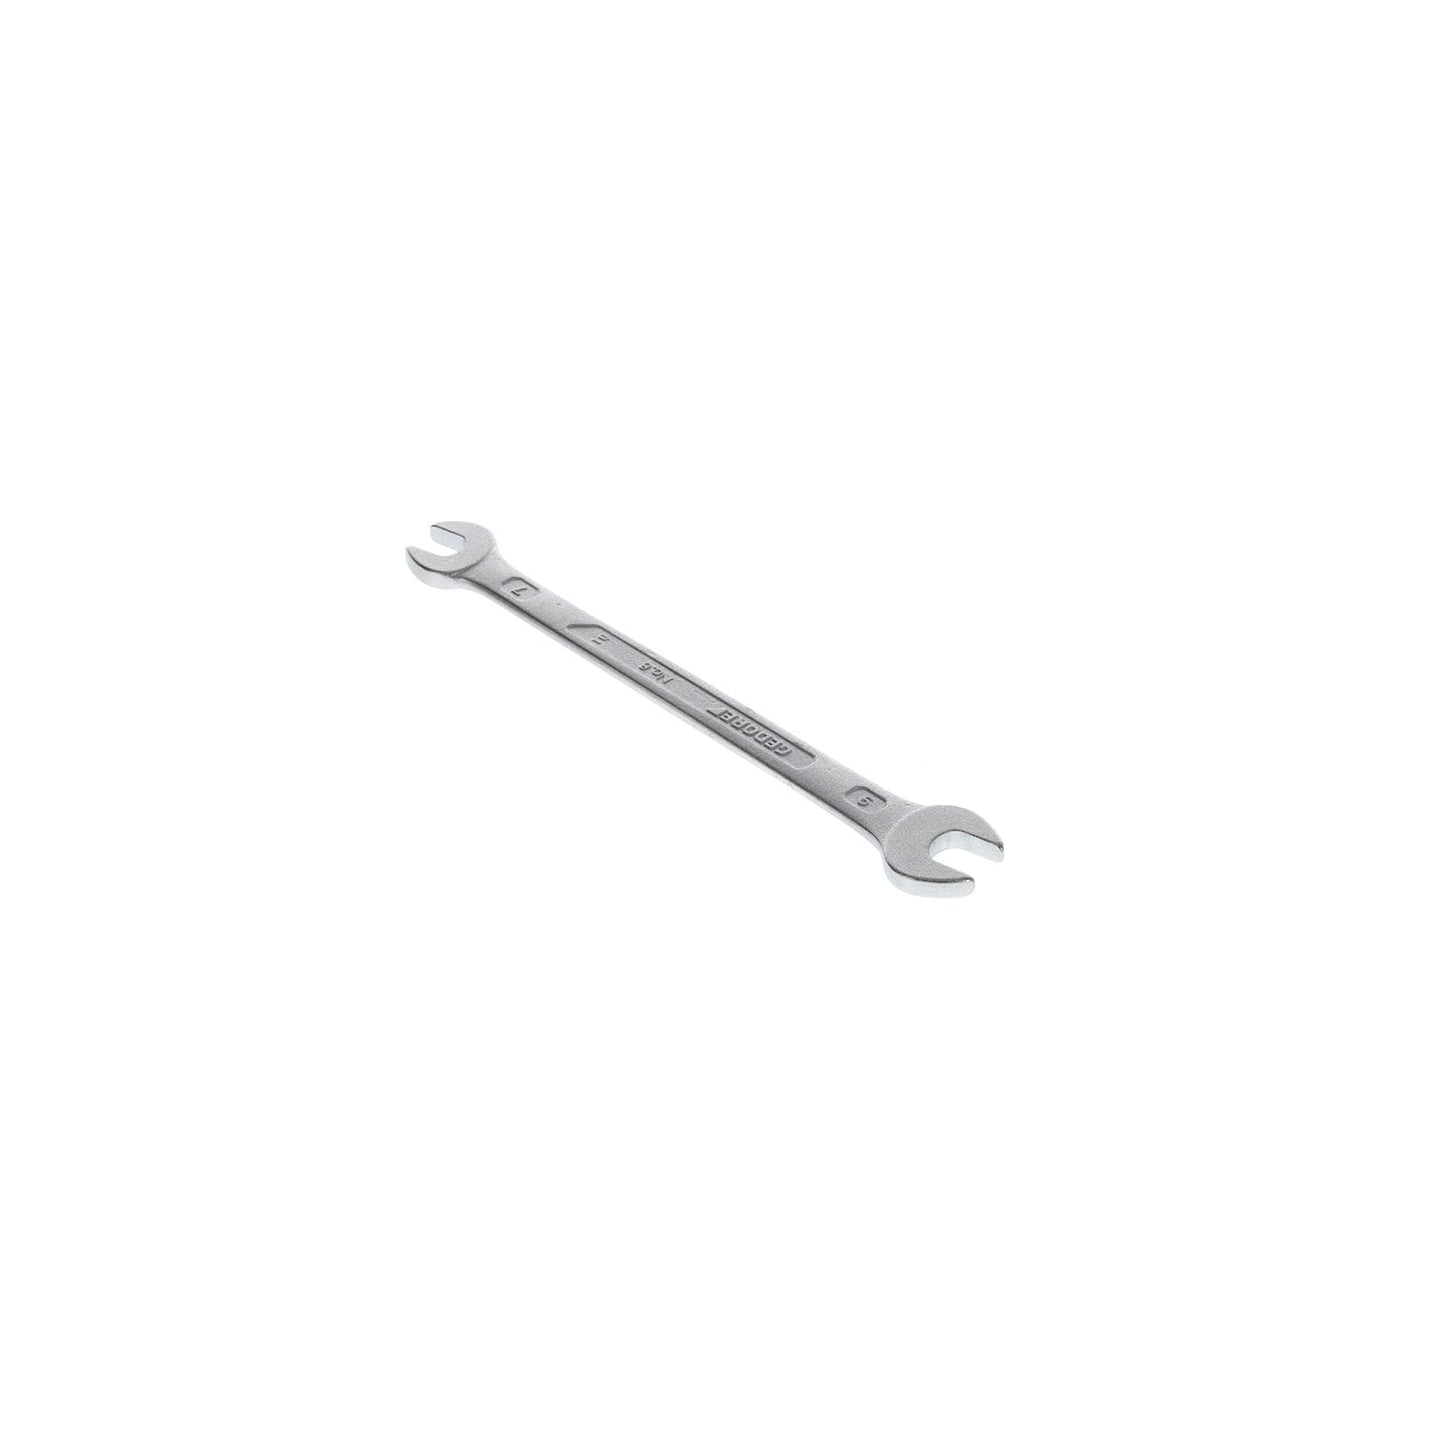 GEDORE 6 7X9 - 2-Mount Fixed Wrench, 7x9 (6064130)